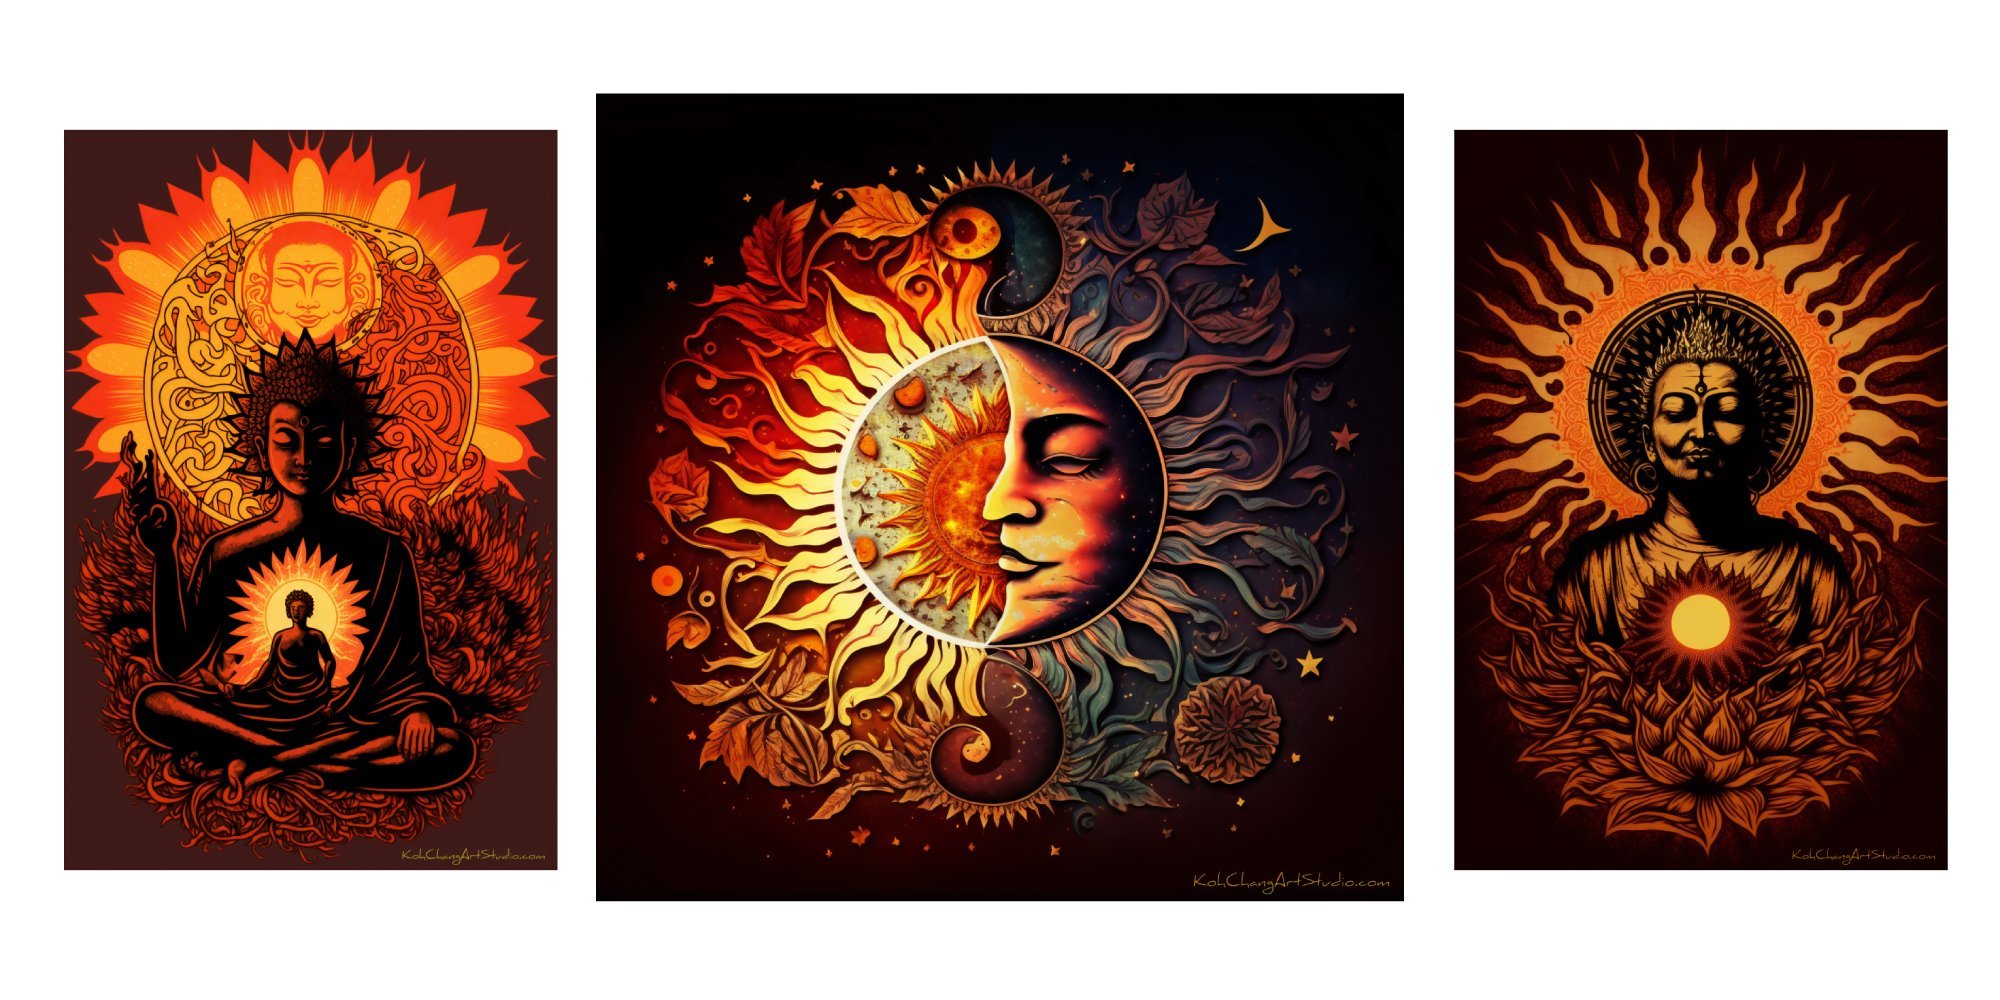 ELYSIUM Design - Sun's transition, twin Buddhas meditating, and a vision of paradise.